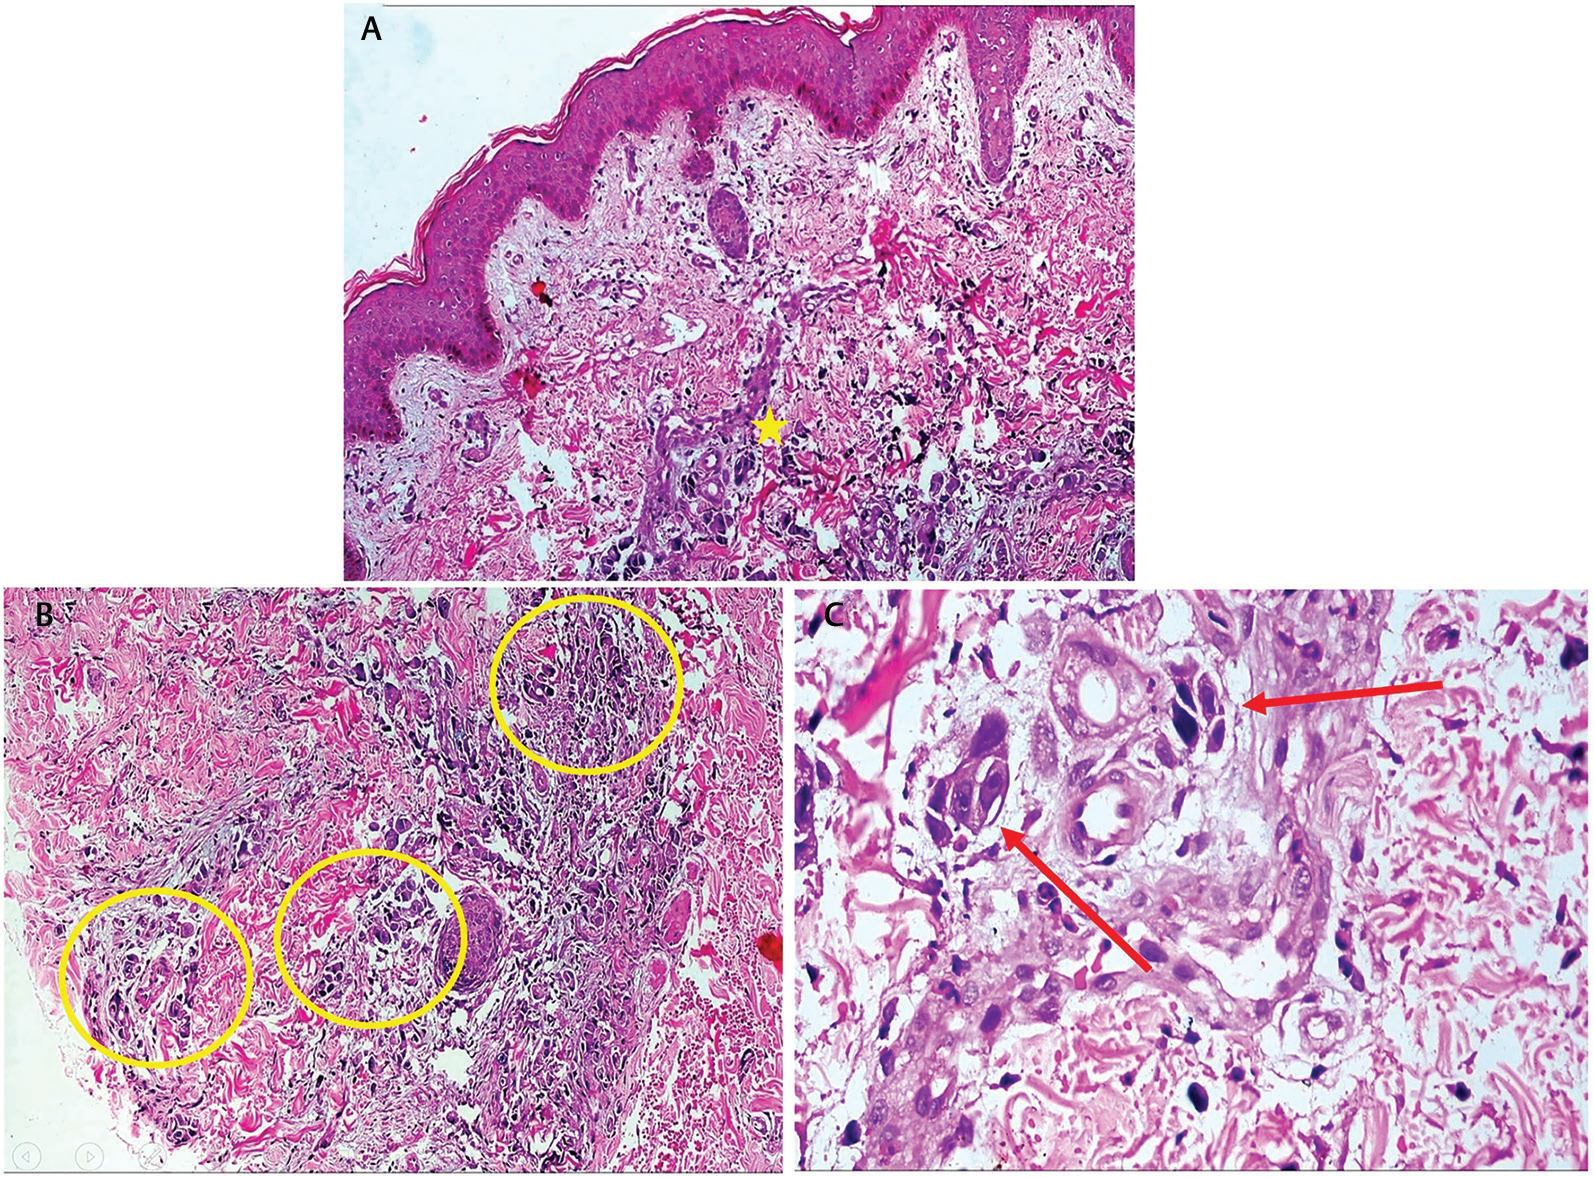 Fig. 4 (A) Skin biopsy reveals focal collections of intermediate-to-large sized cells in the dermis particularly around perivascular areas (yellow star; hematoxylin & eosin [H&E], 100x). (B) The malignant cells lying singly in small nests, attempting to form acini (yellow circle) (H&E, 200x). (C) Malignant cells are anaplastic with large irregular hyperchromatic nuclei (red arrow) (H&E, 400x).